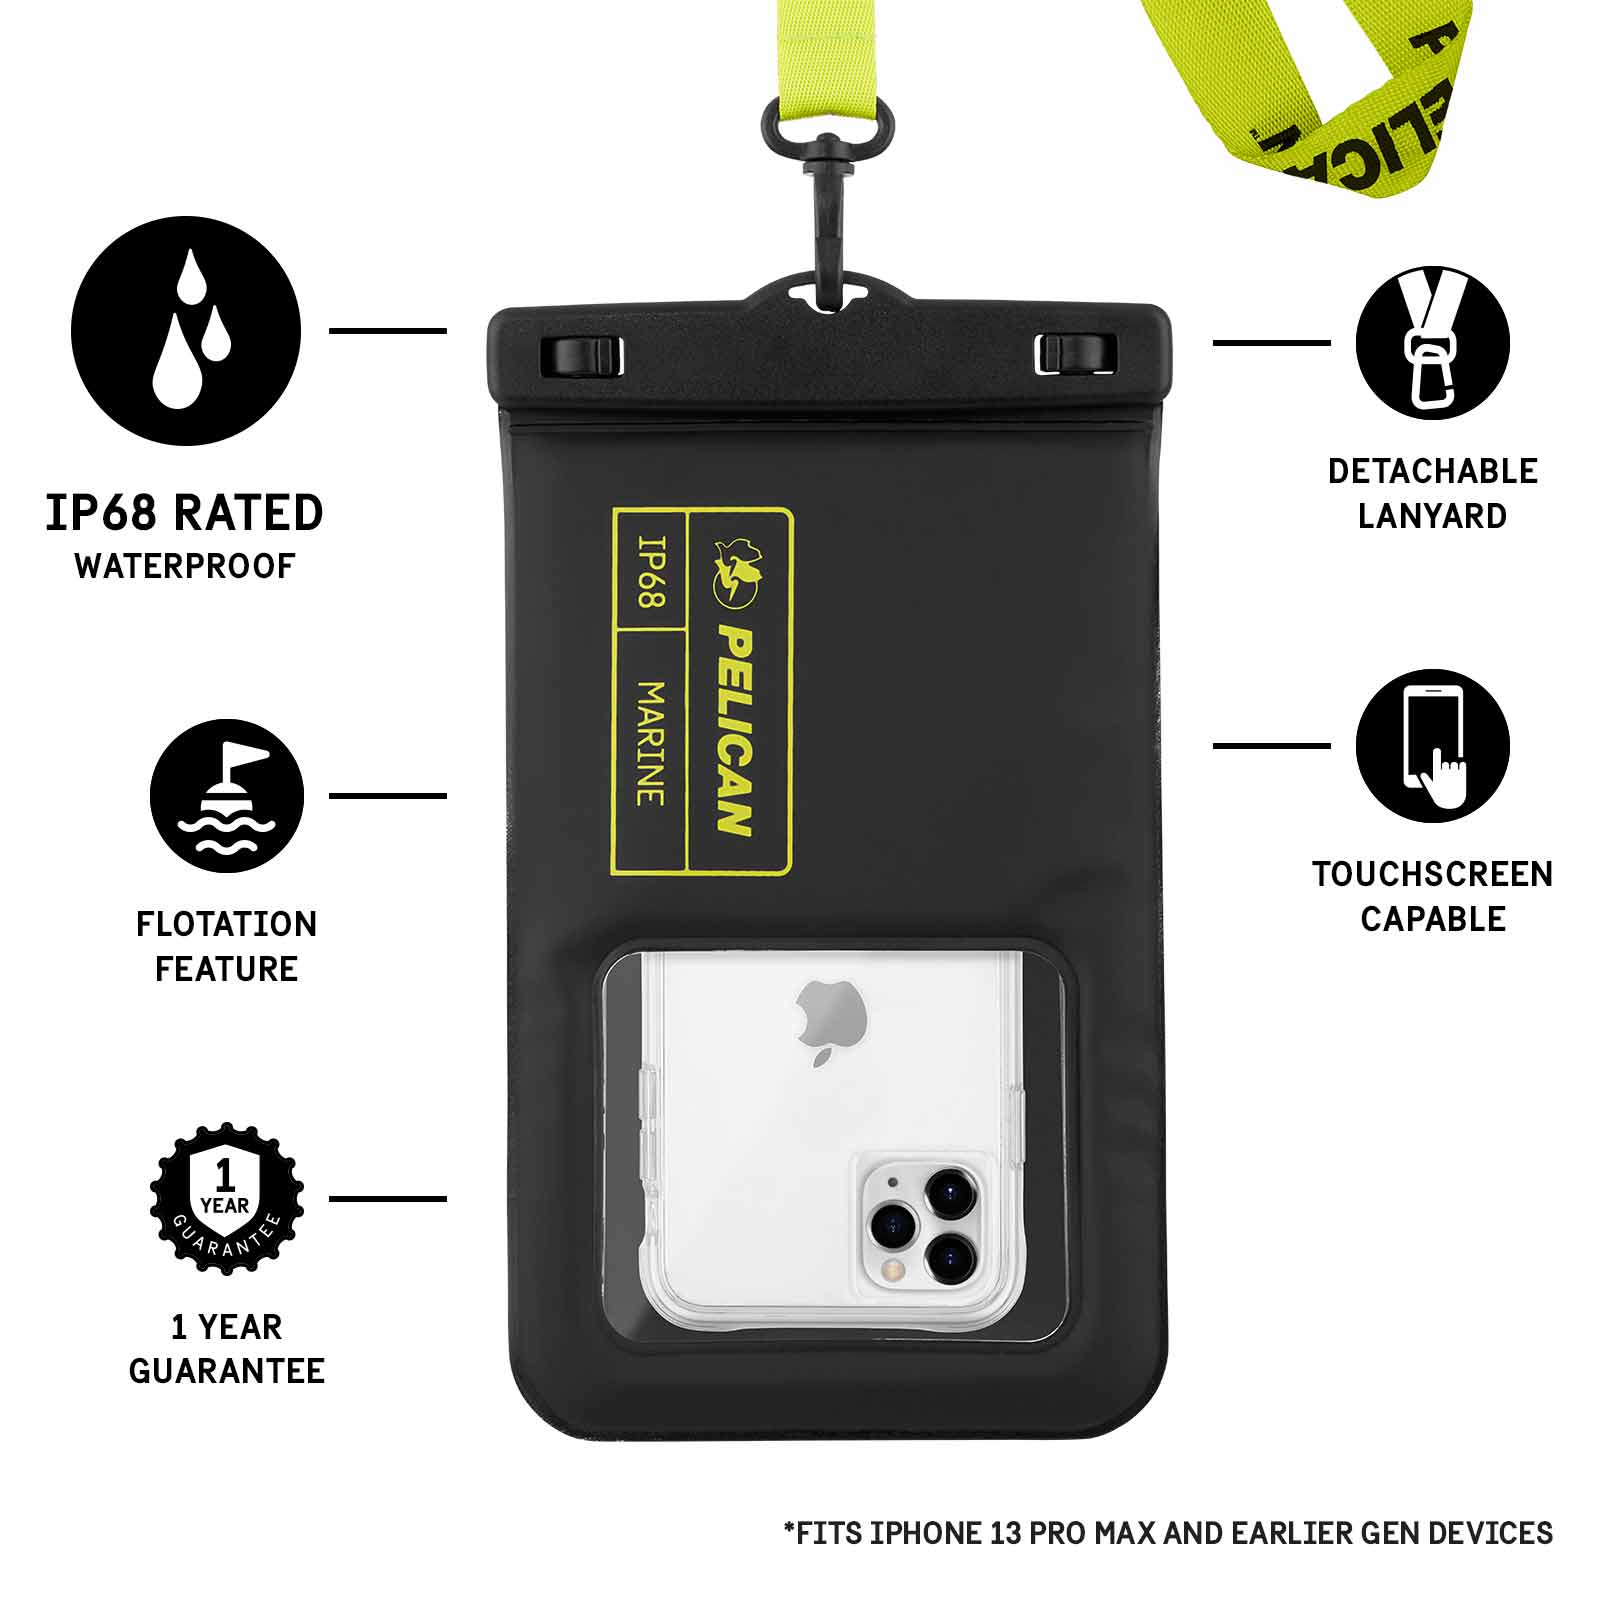 IP68 Rated Waterproof, flotation feature, 1 year guarantee, detachable lanyard, touchscreen capable. Height - 9.37" Width- 5.43" Depth - 0.55" *fits iPhone 13 Pro Max and Earlier Gen Devices. color::Black/Hi Vis Yellow